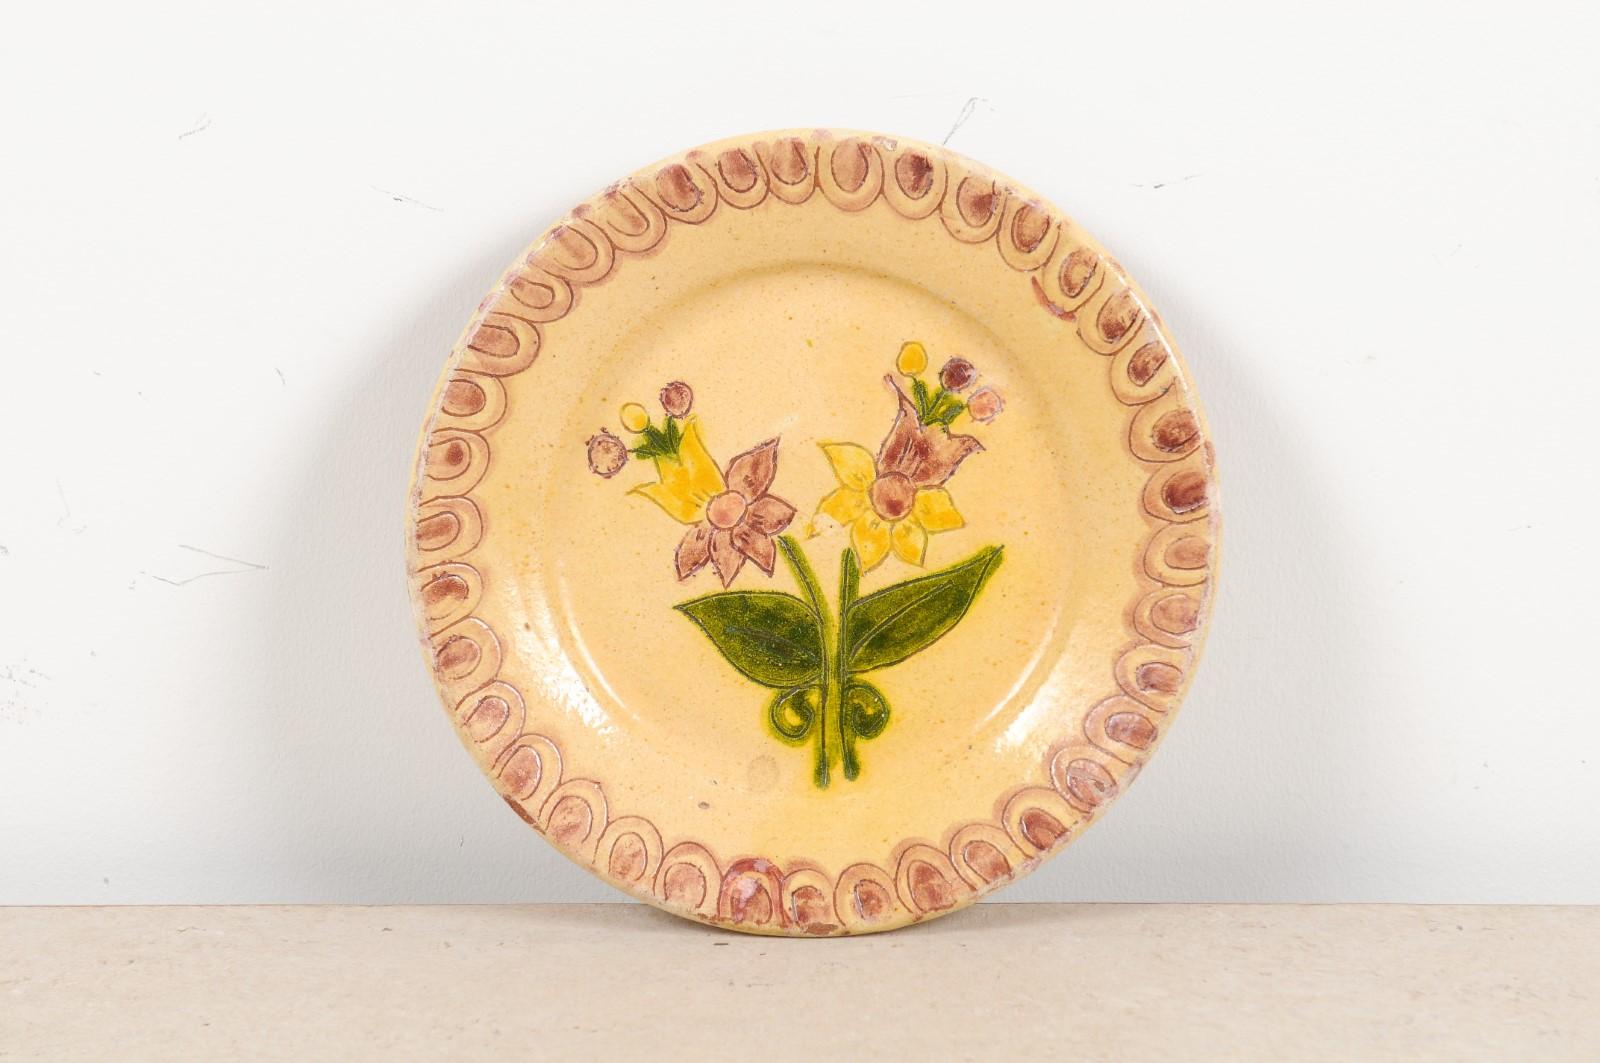 A Portuguese painted clay pottery plate from the early 20th century with floral decor and decorated border. Created in Portugal during the early years of the 20th century, this painted clay plate charms us with its naïve floral decor, showcasing